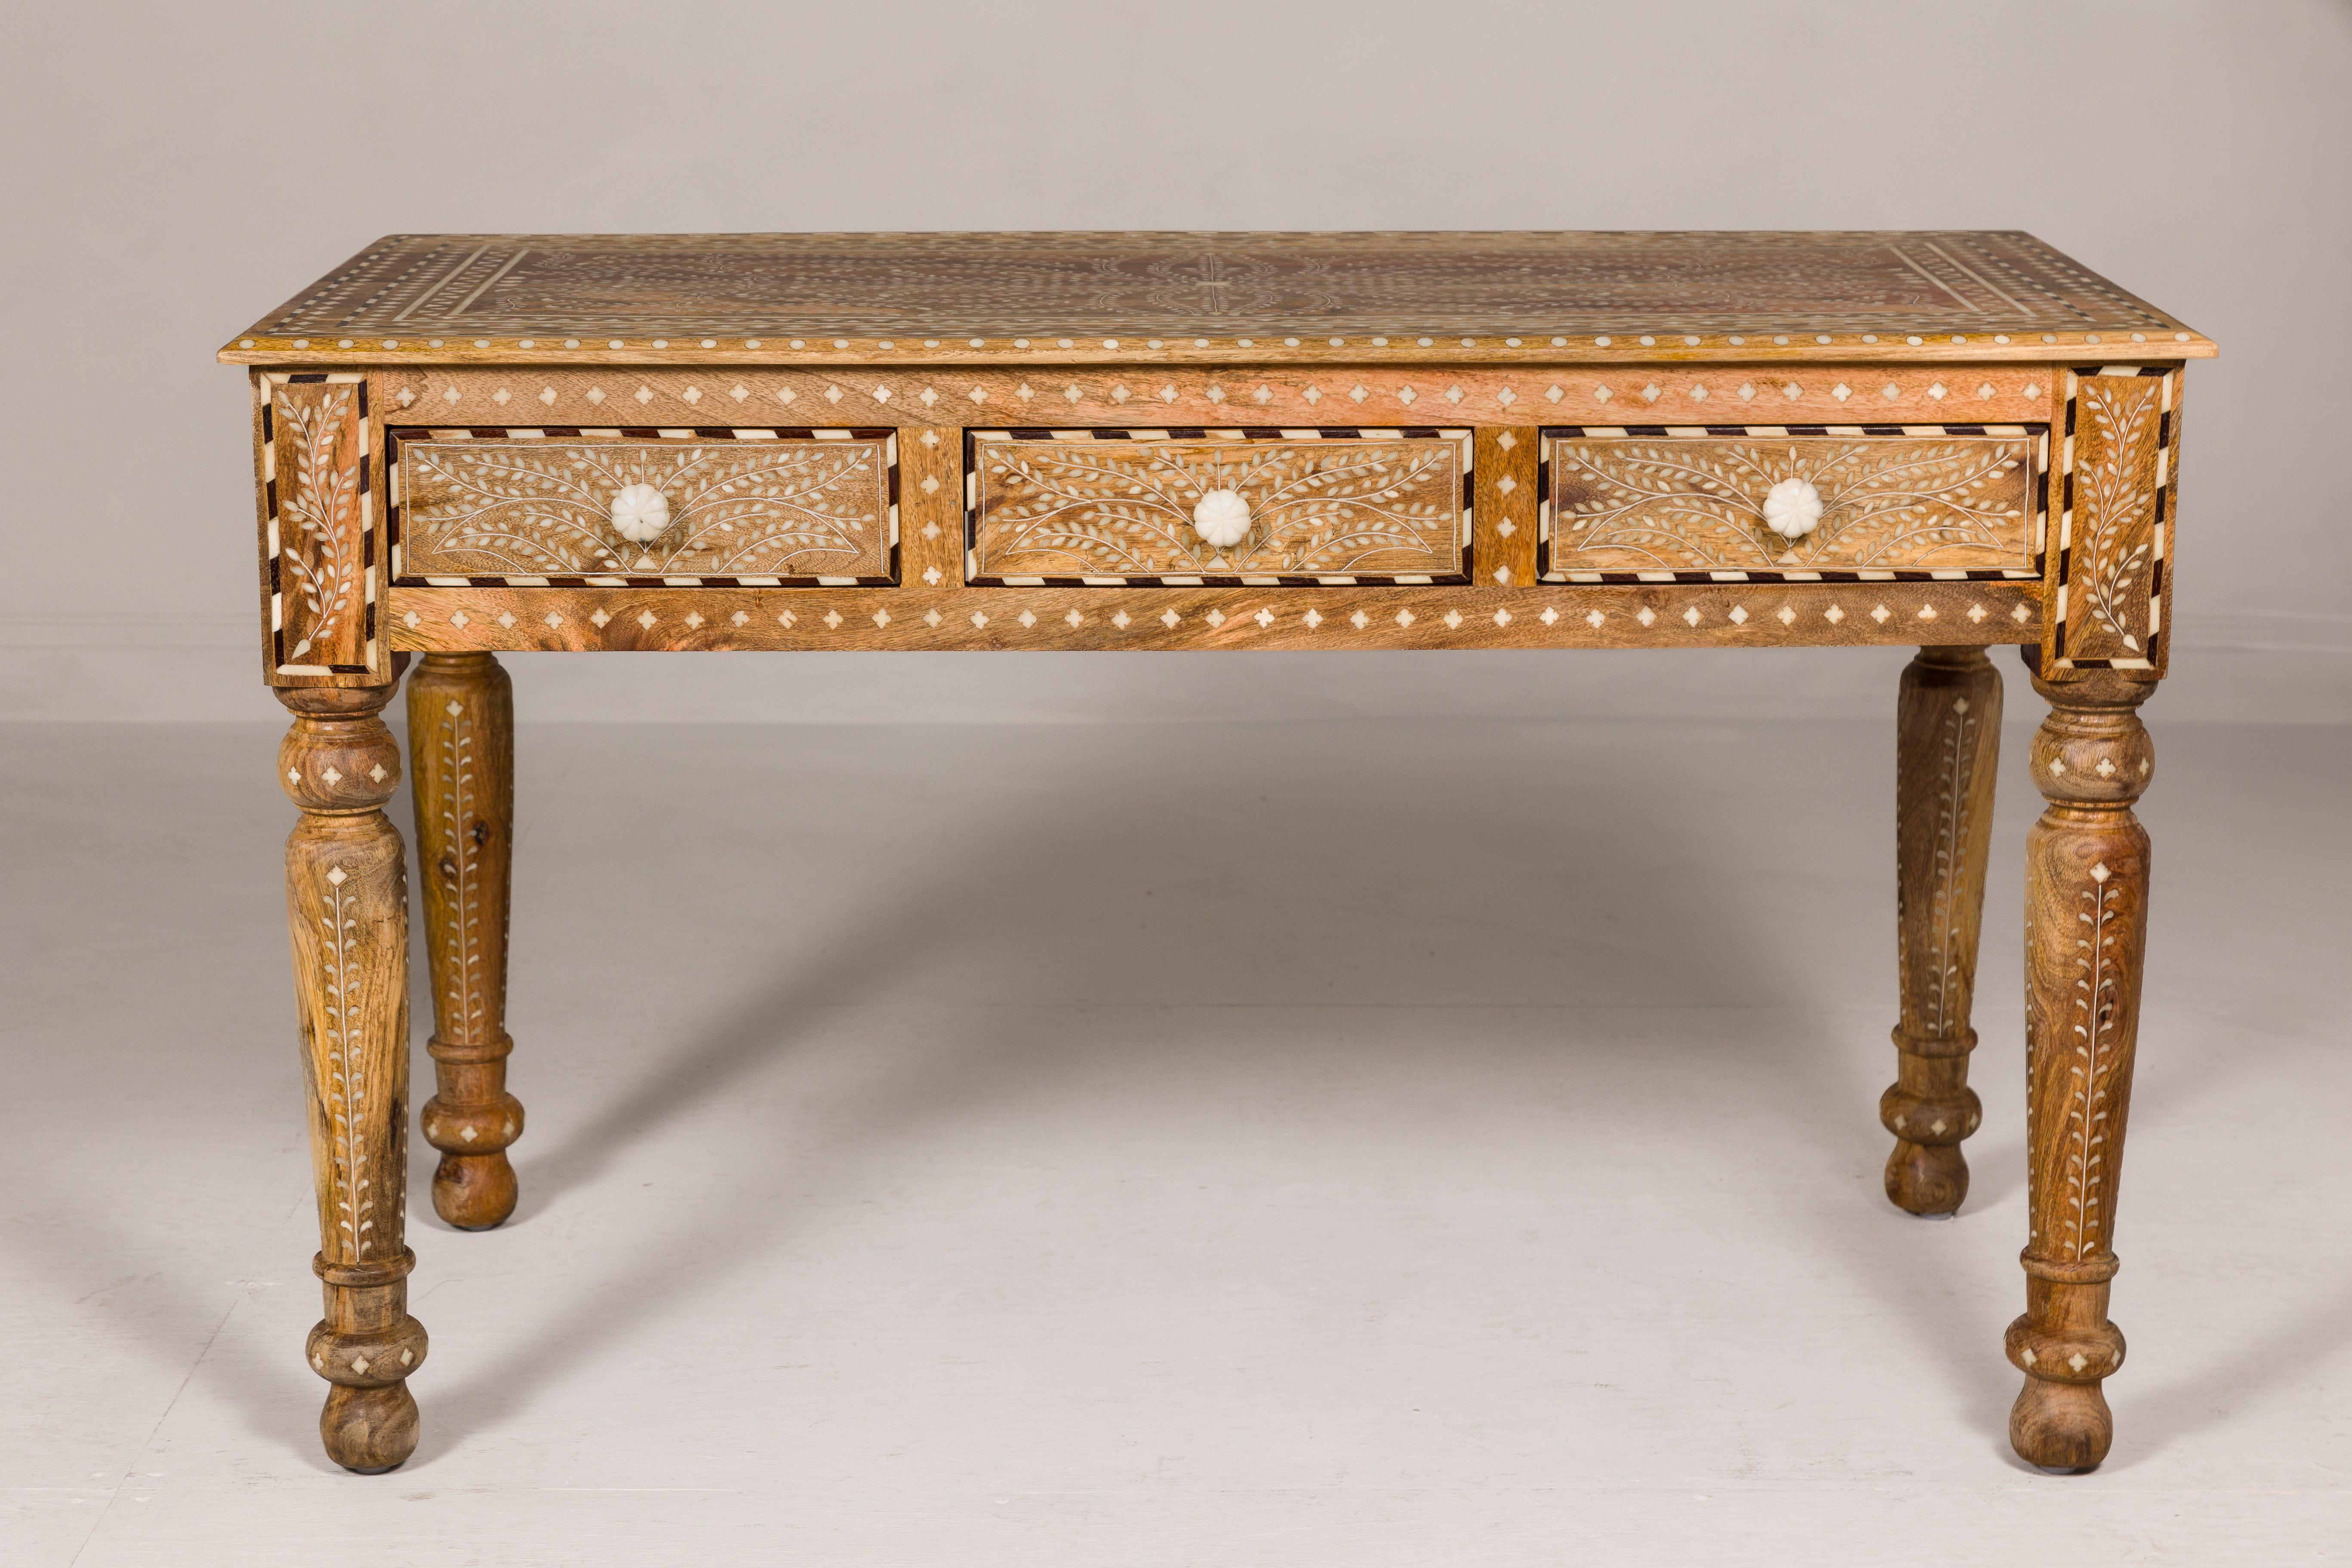 An Anglo-Indian style mango wood console table or desk with inlaid bone décor, three drawers and turned legs. This Anglo-Indian style mango wood console table or desk is a true testament to the artistry of its makers. Its intricate bone inlay decor,